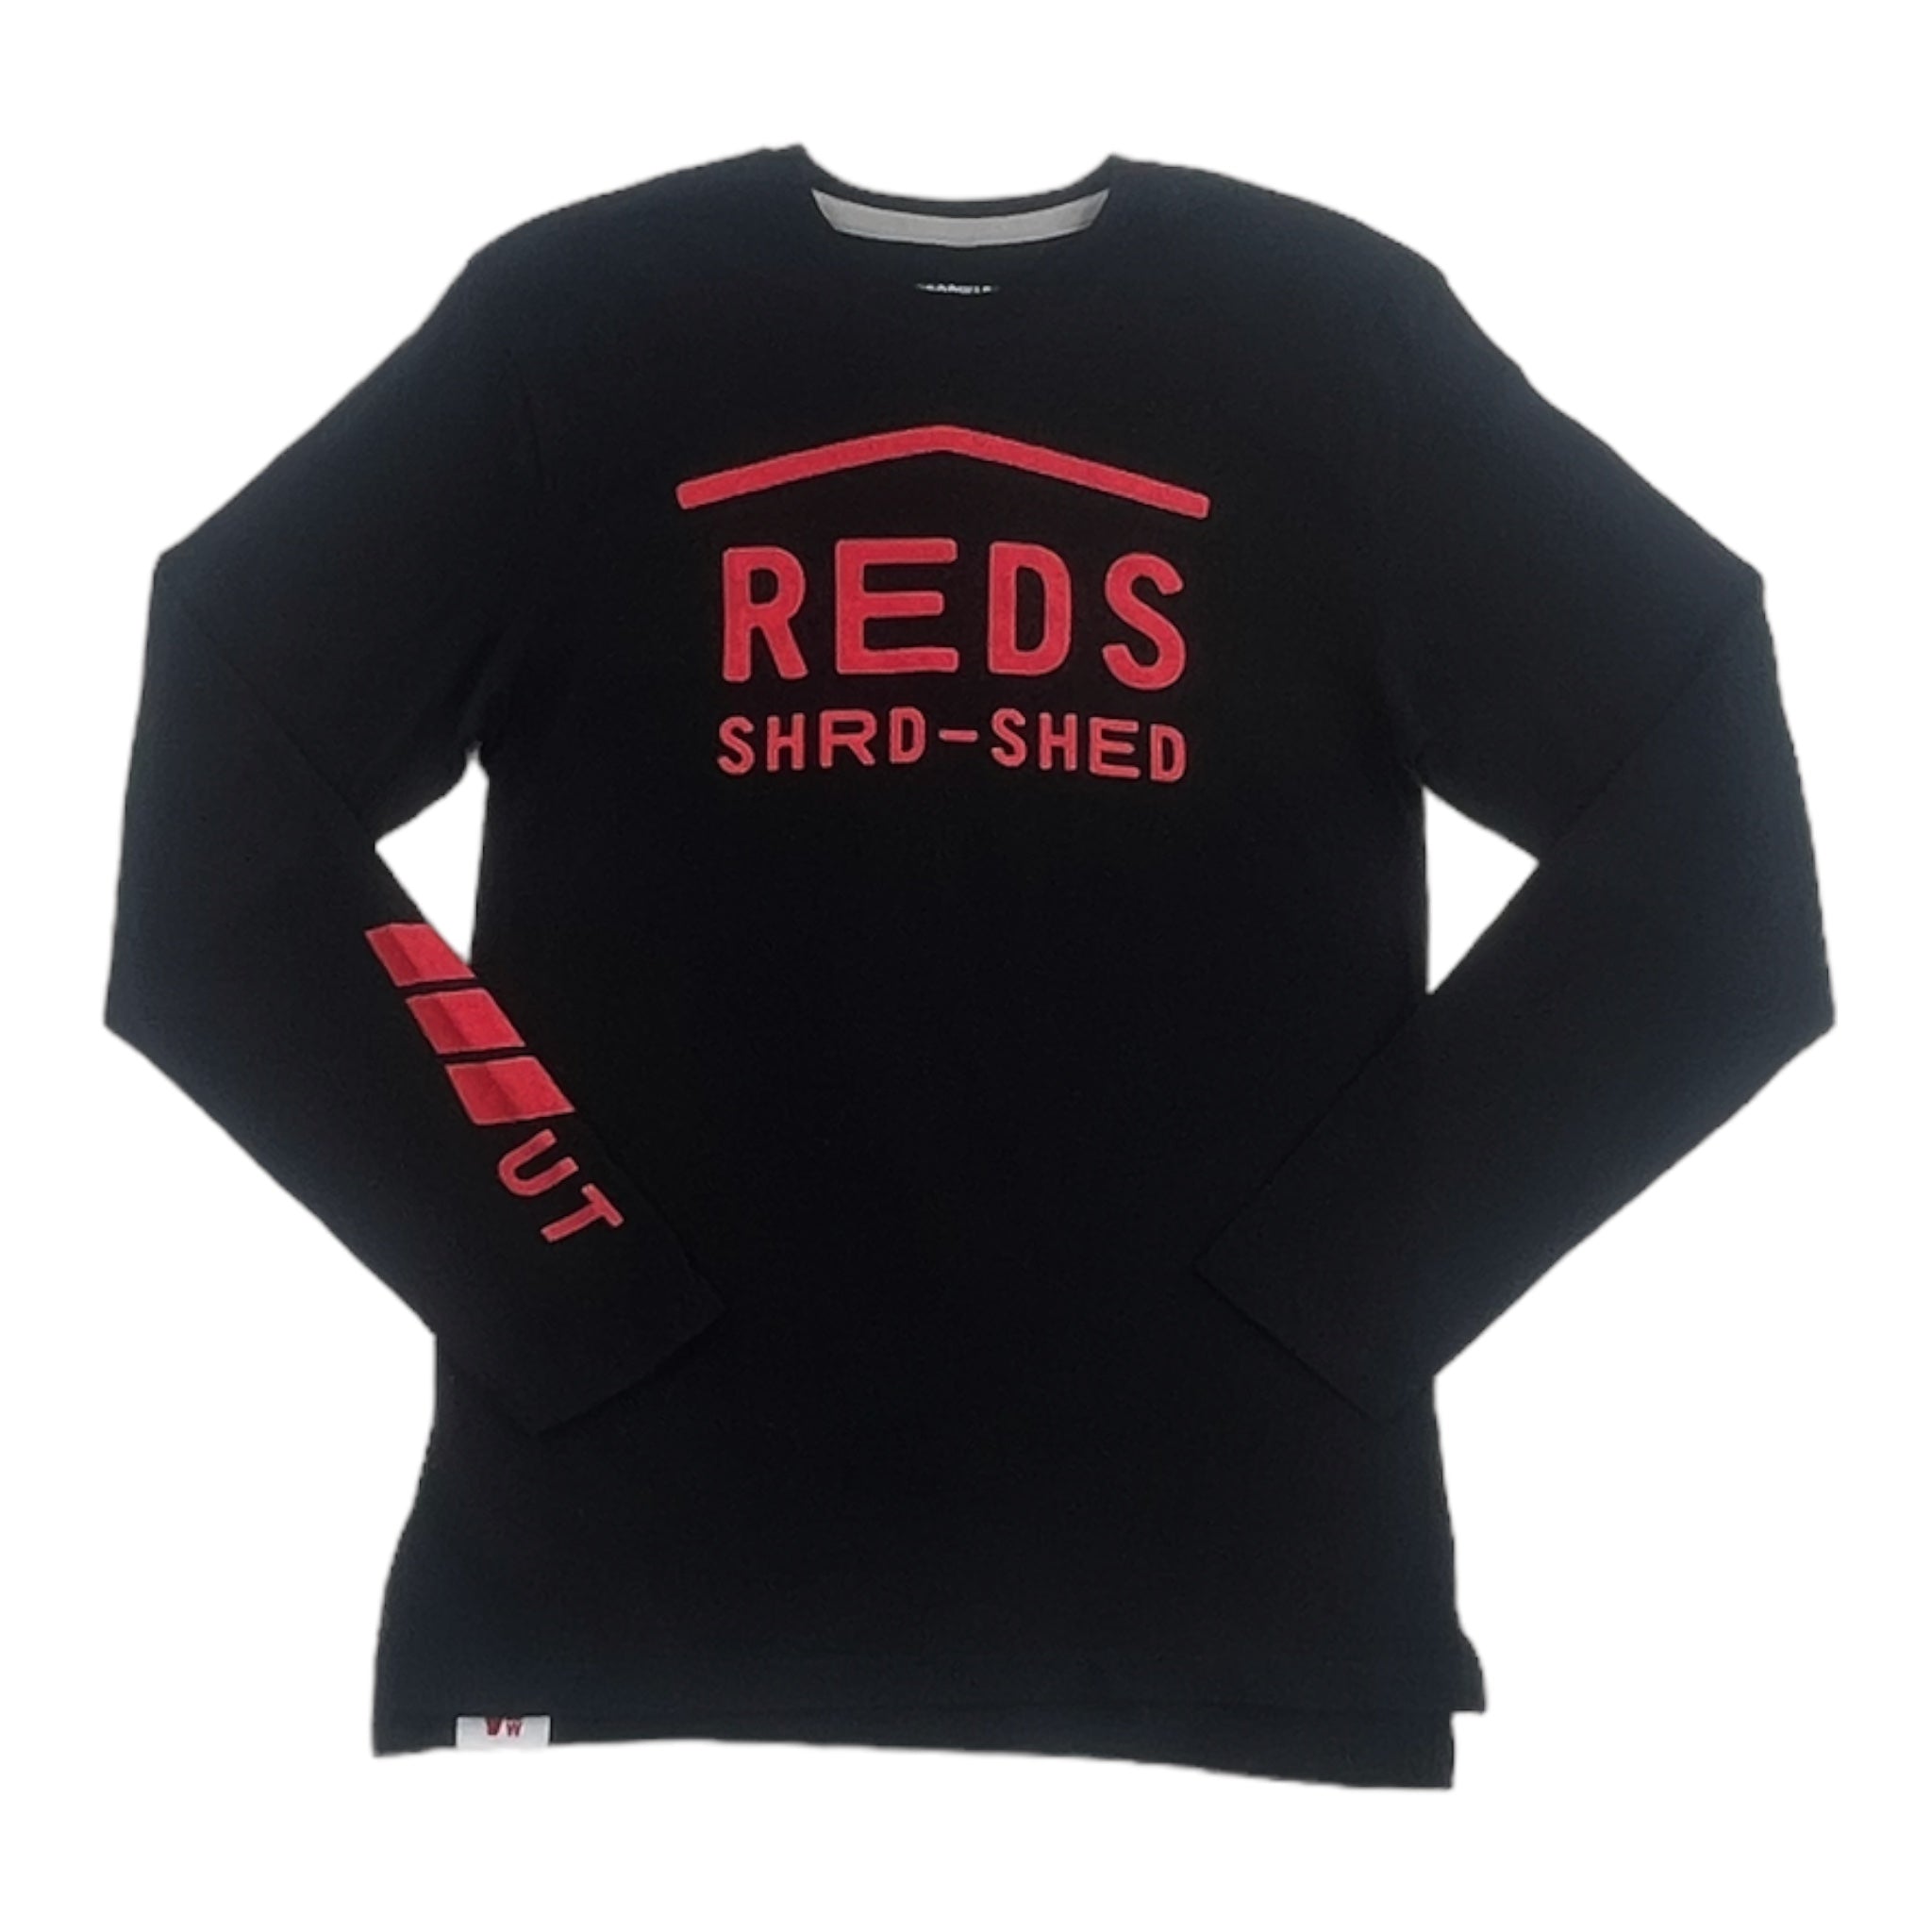 REDS Black Long Sleeve Tee - Copper